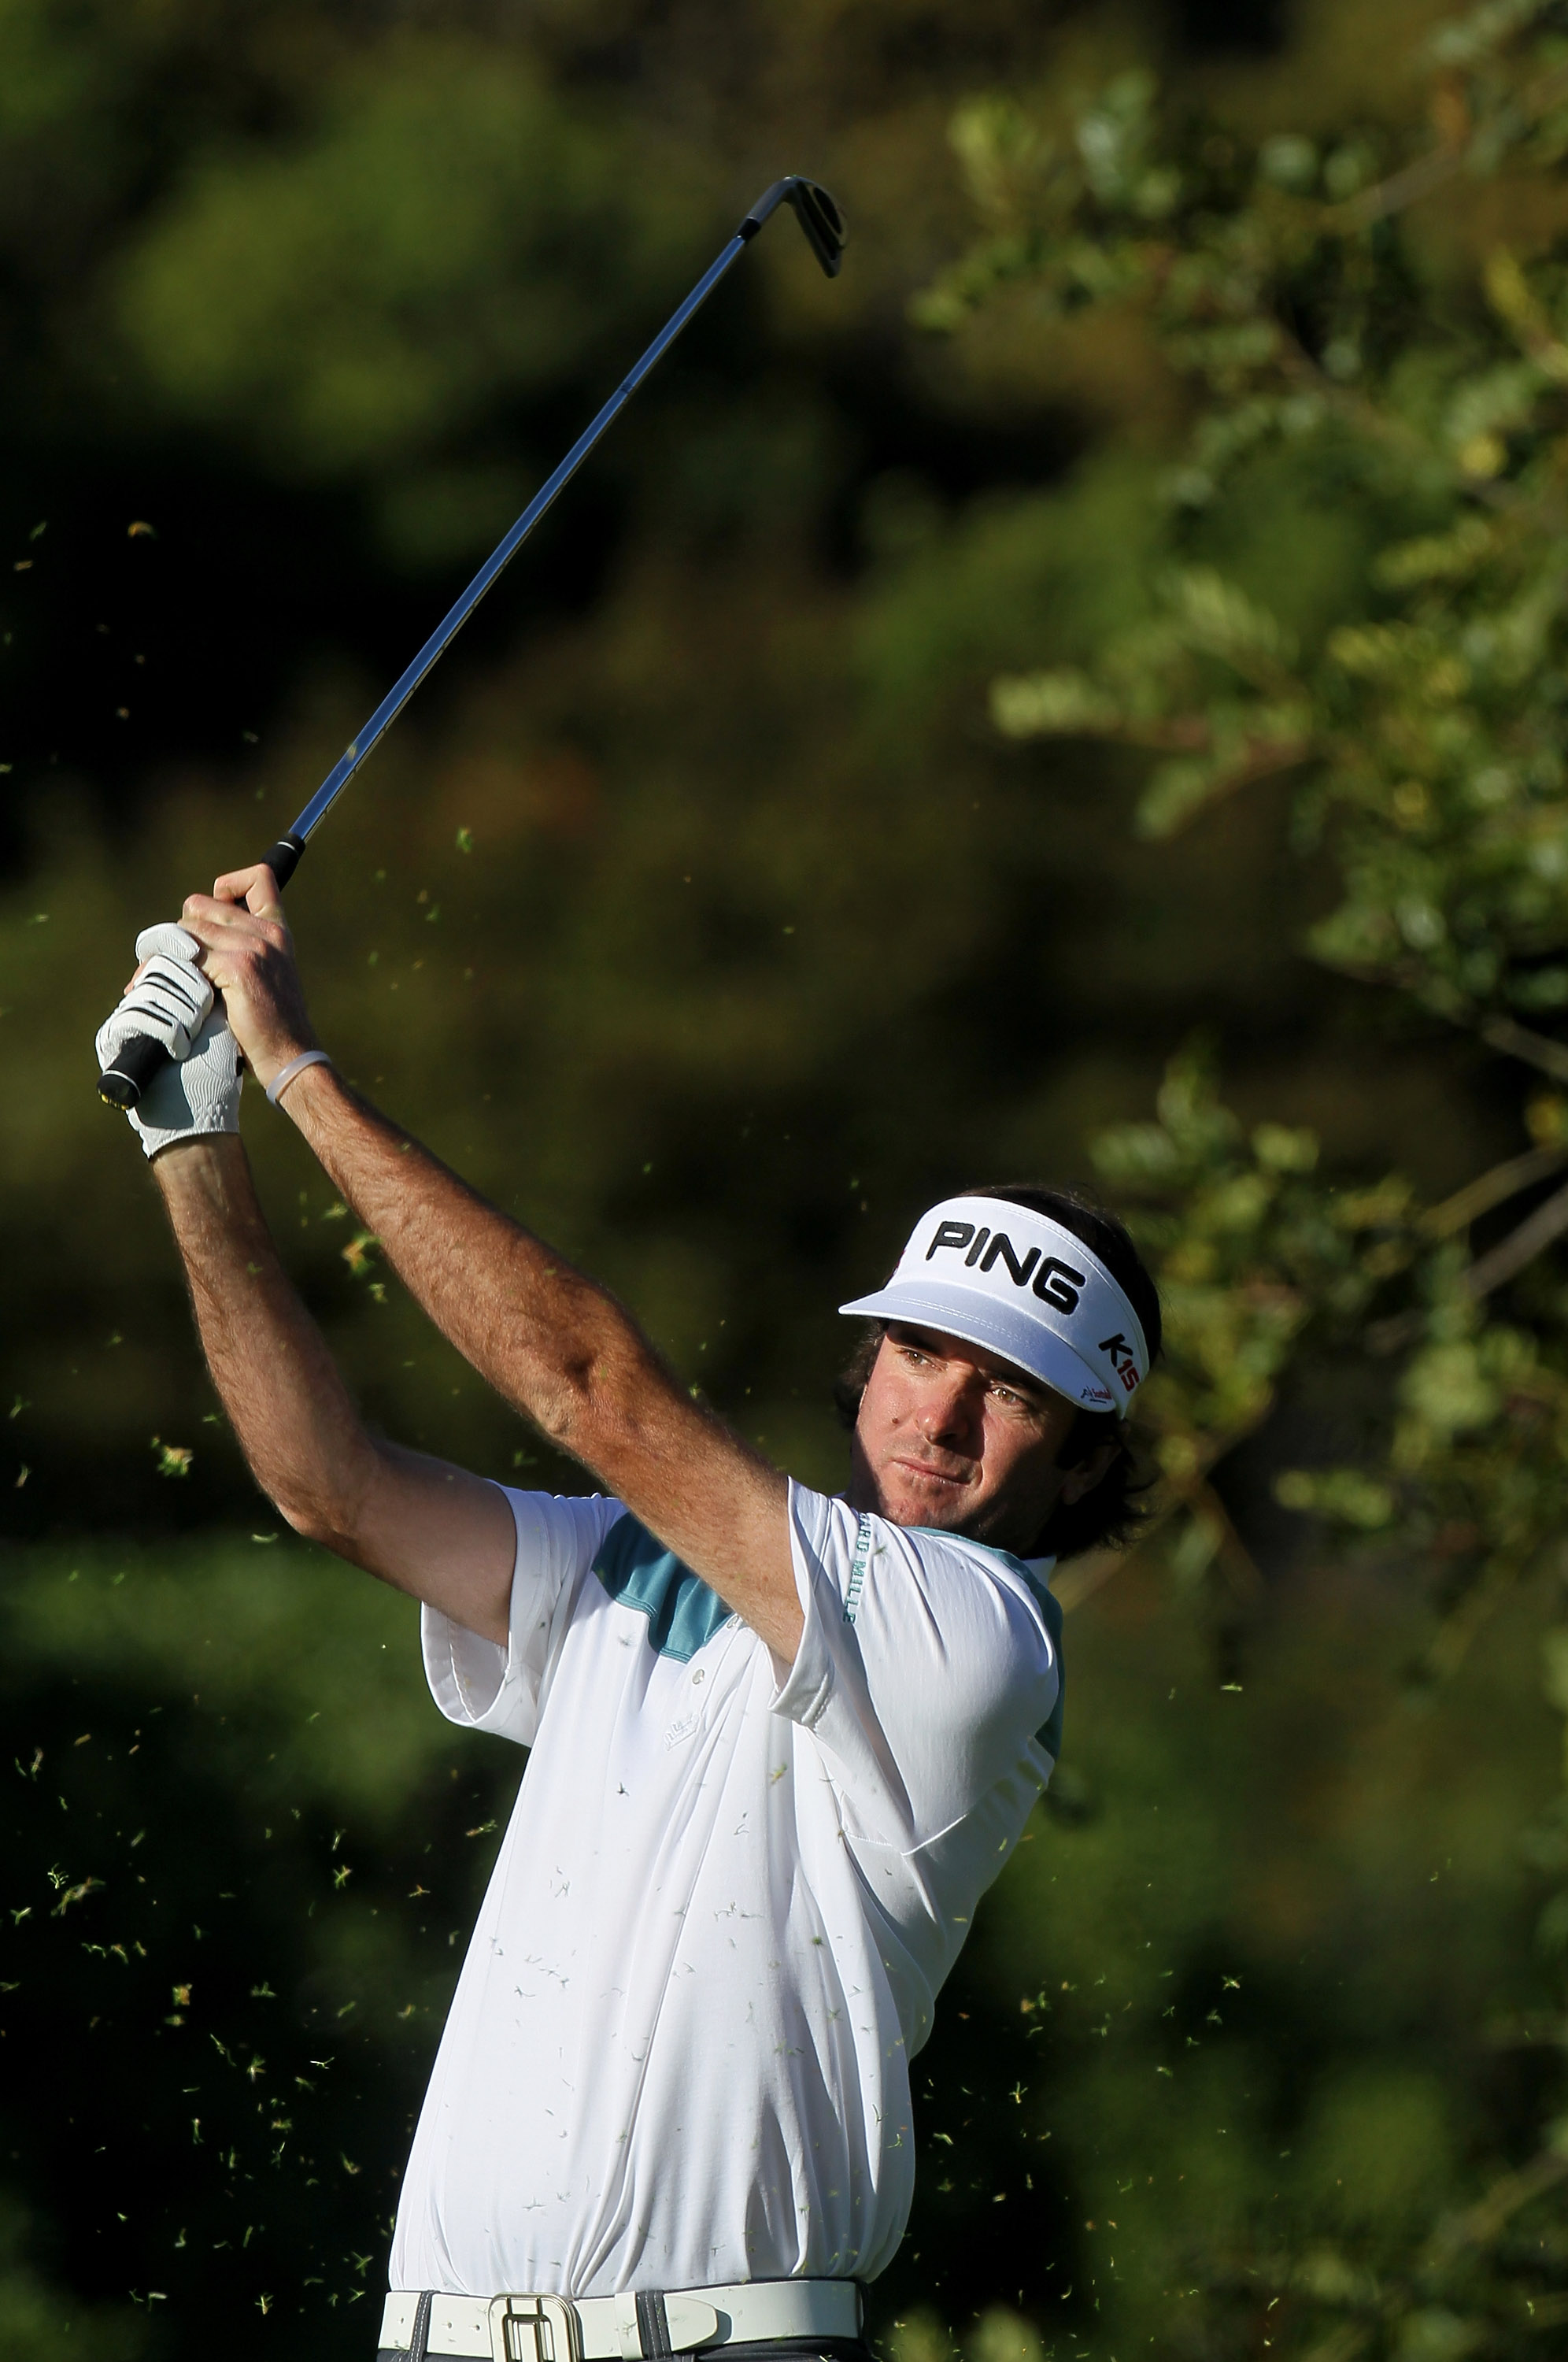 PACIFIC PALISADES, CA - FEBRUARY 17: Bubba Watson hits his tee shot on the fourth hole during round one of the Northern Trust Open at Riviera Counrty Club on February 17, 2011 in Pacific Palisades, California.  (Photo by Stephen Dunn/Getty Images)